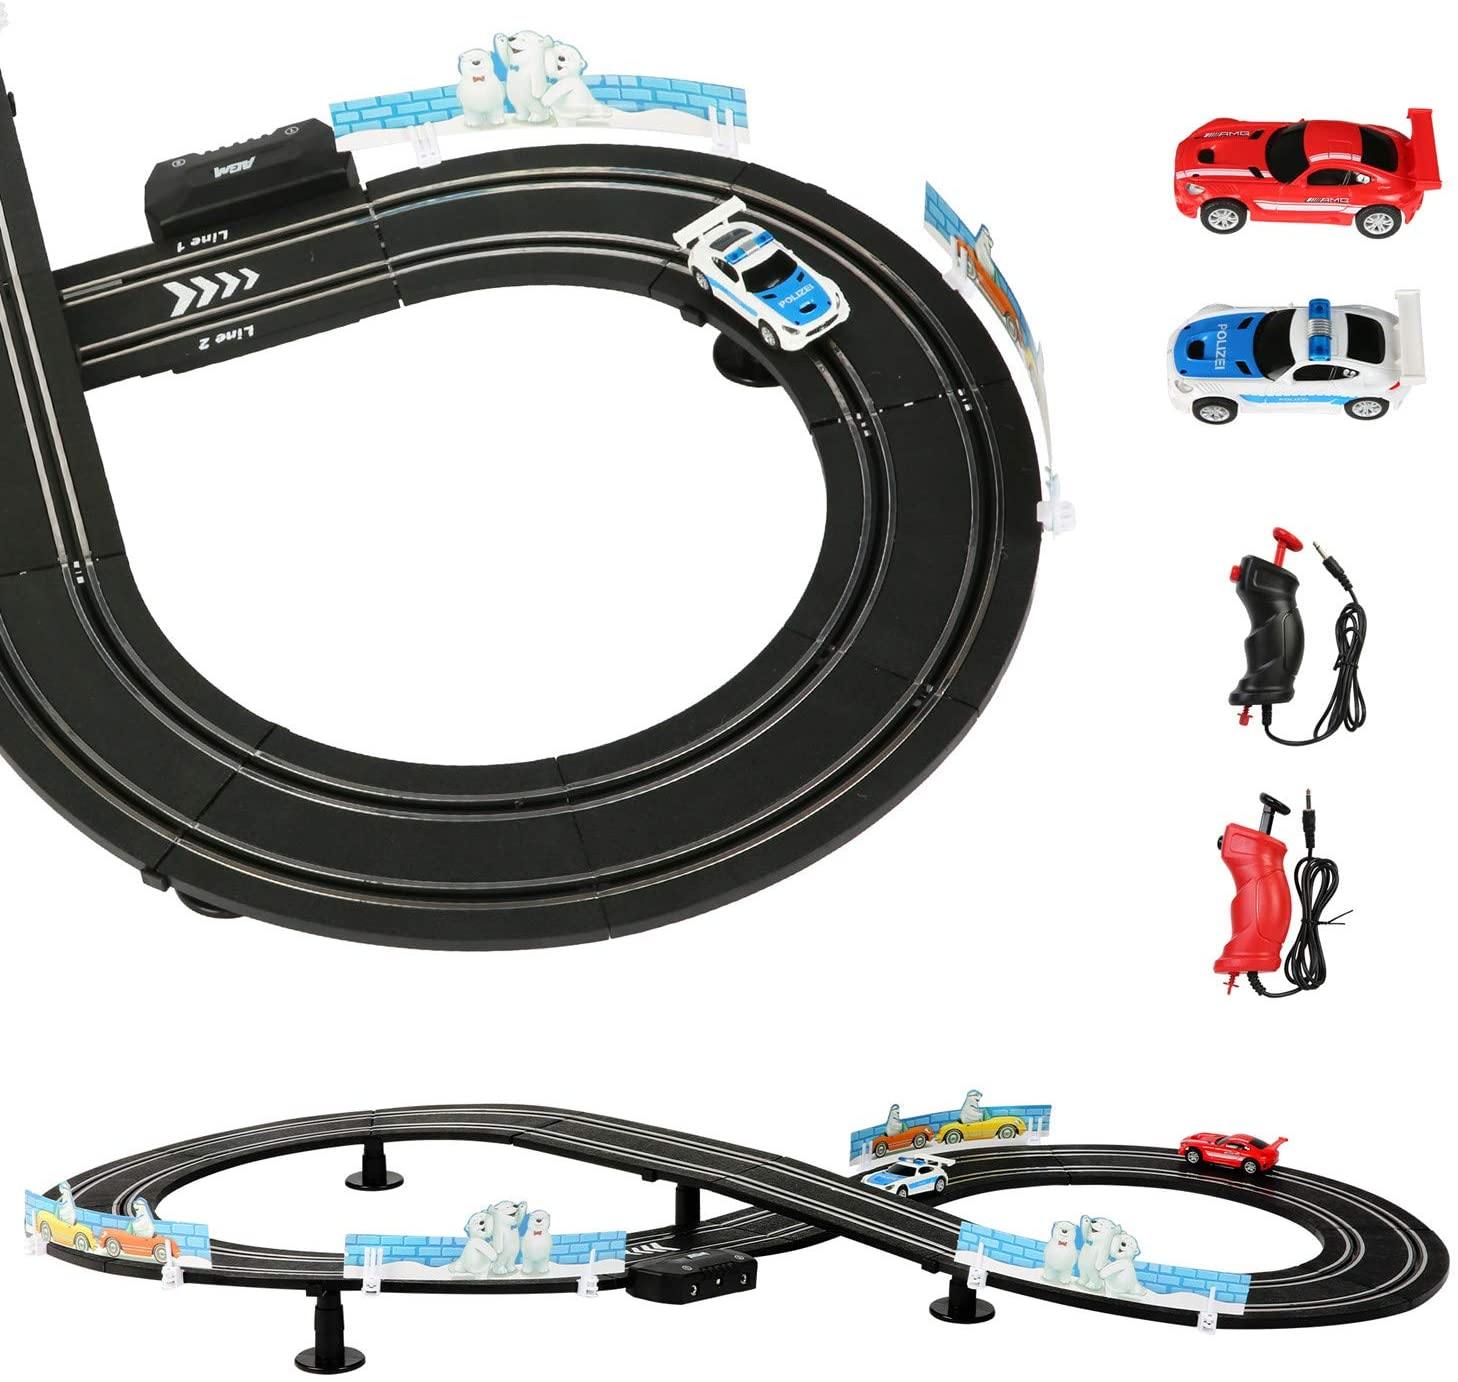 Electric 1:64 Scale Slot Car Racing Track Set Toddler Game Toy With Two Cars For Dual Racing For Kids - Bosonshop